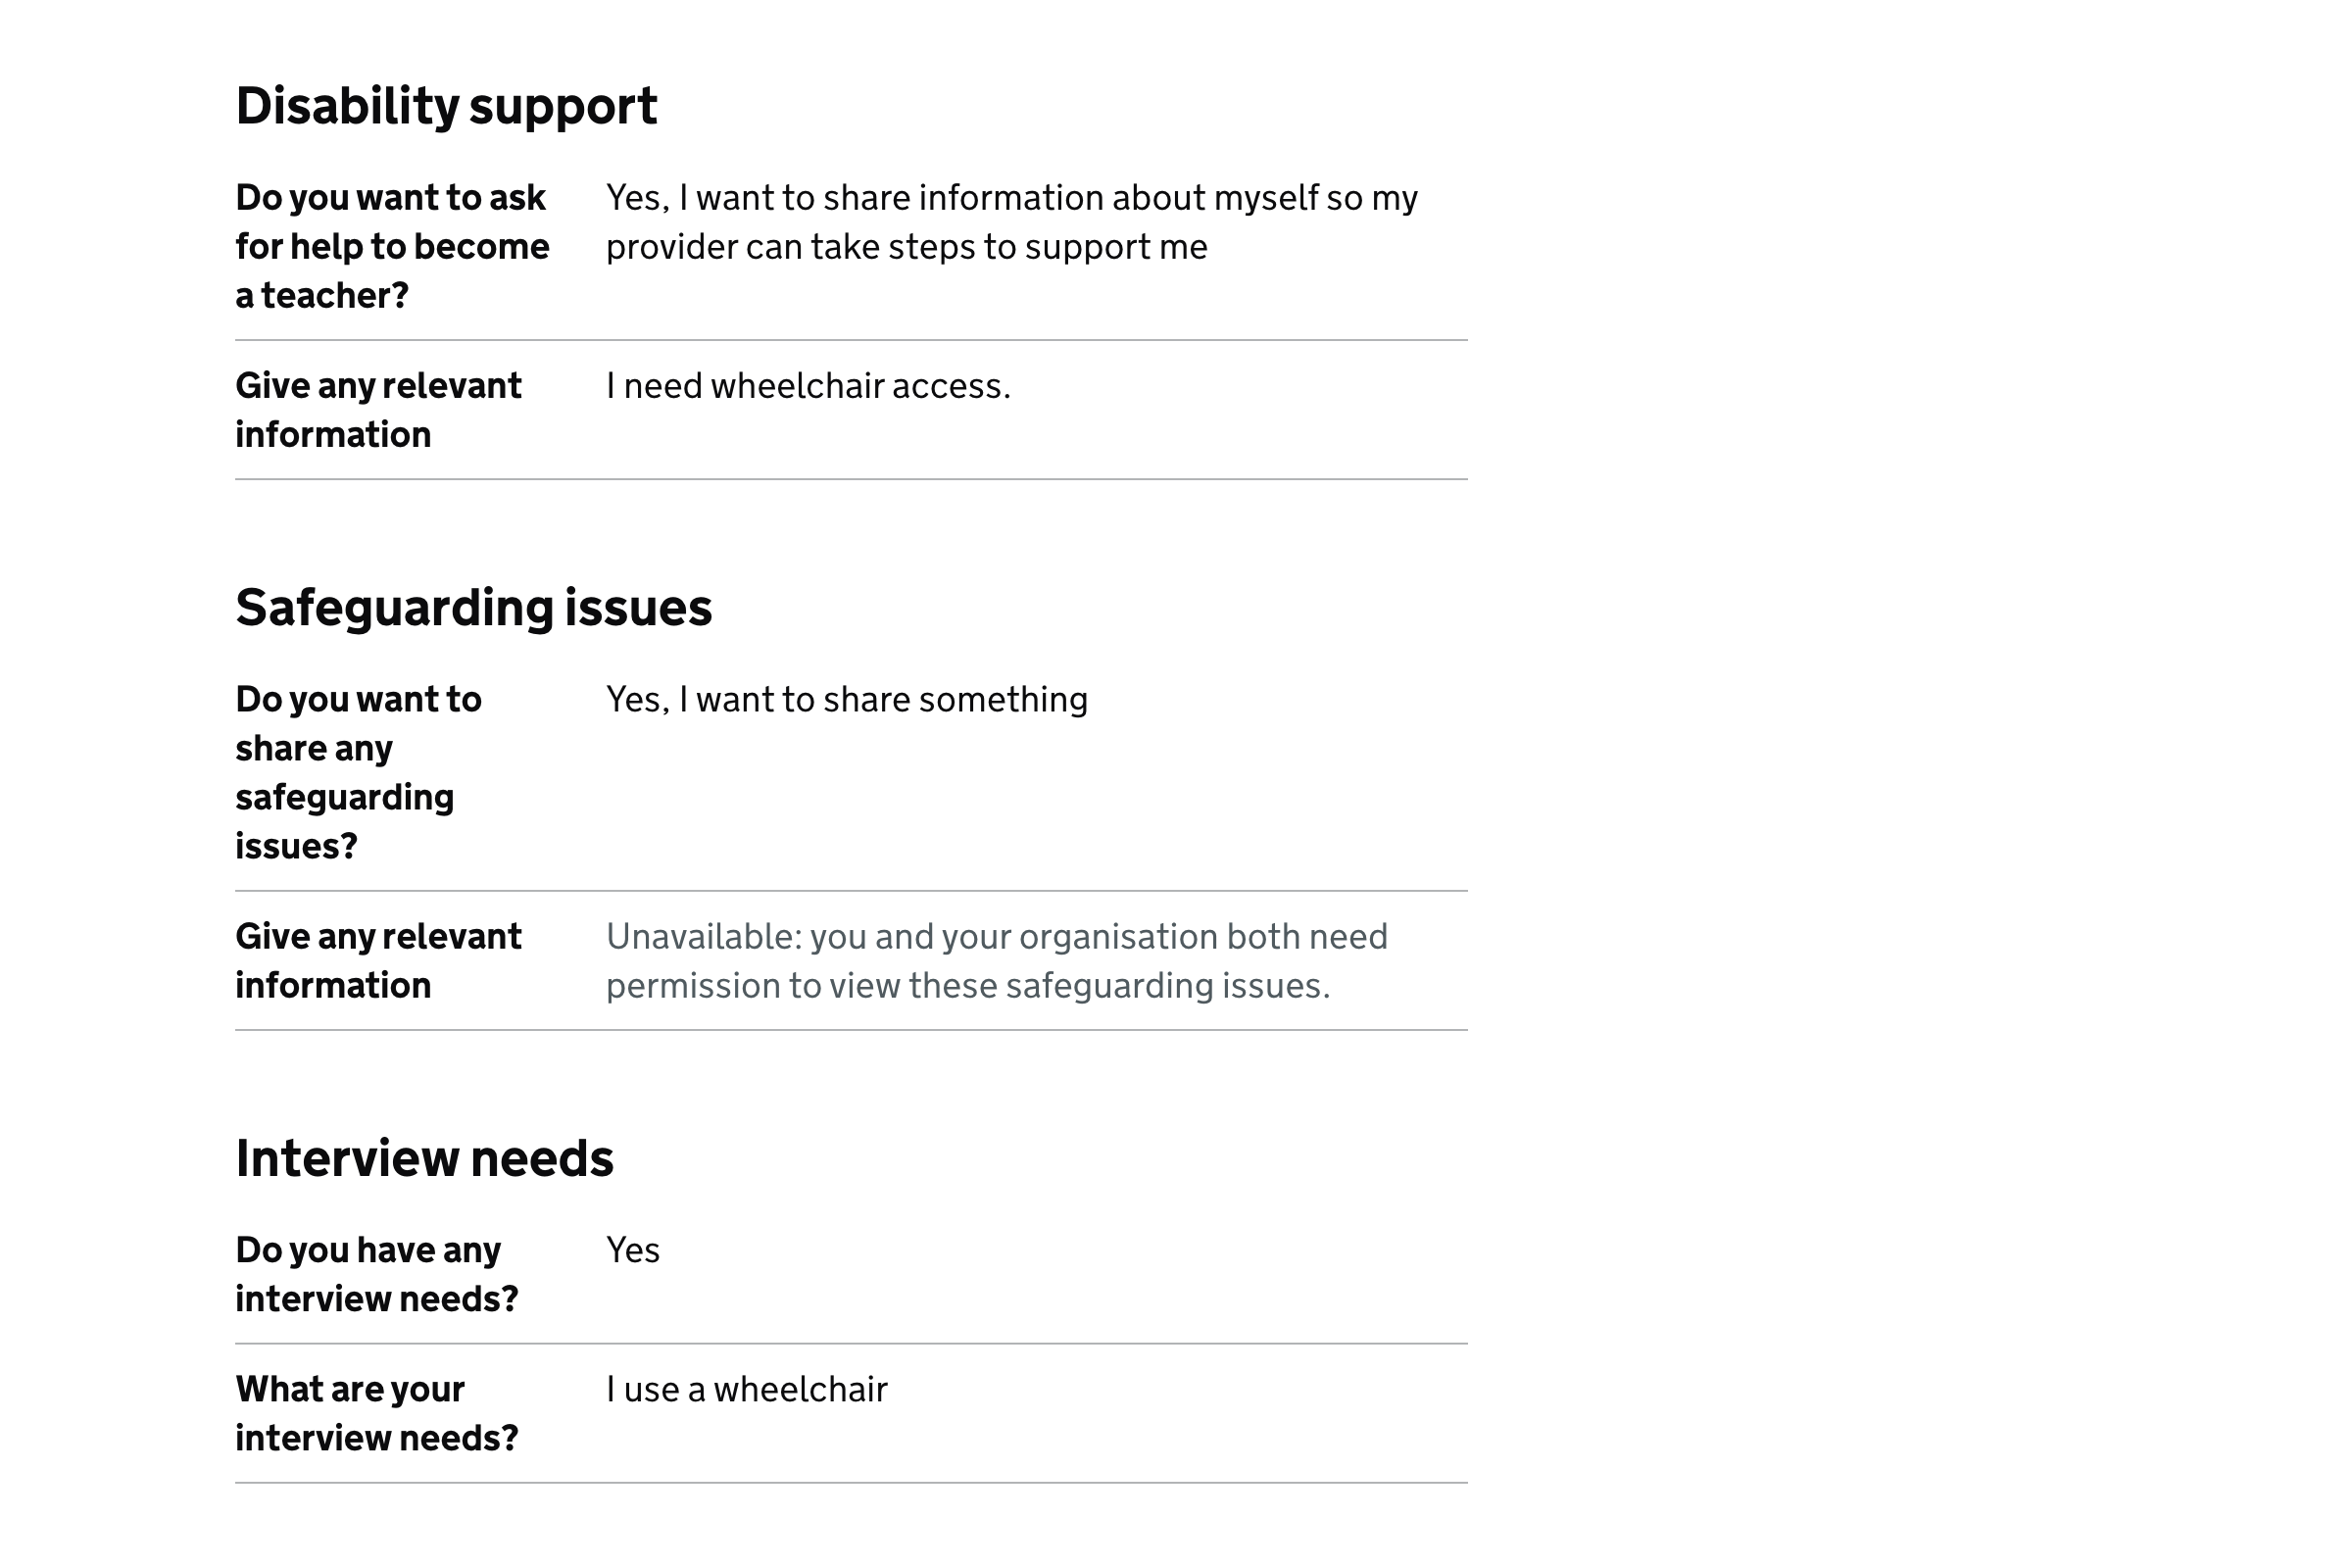 Screenshot of ‘Disability support’, ‘Safeguarding issues’ and ‘Interview needs’ sections of the application page.